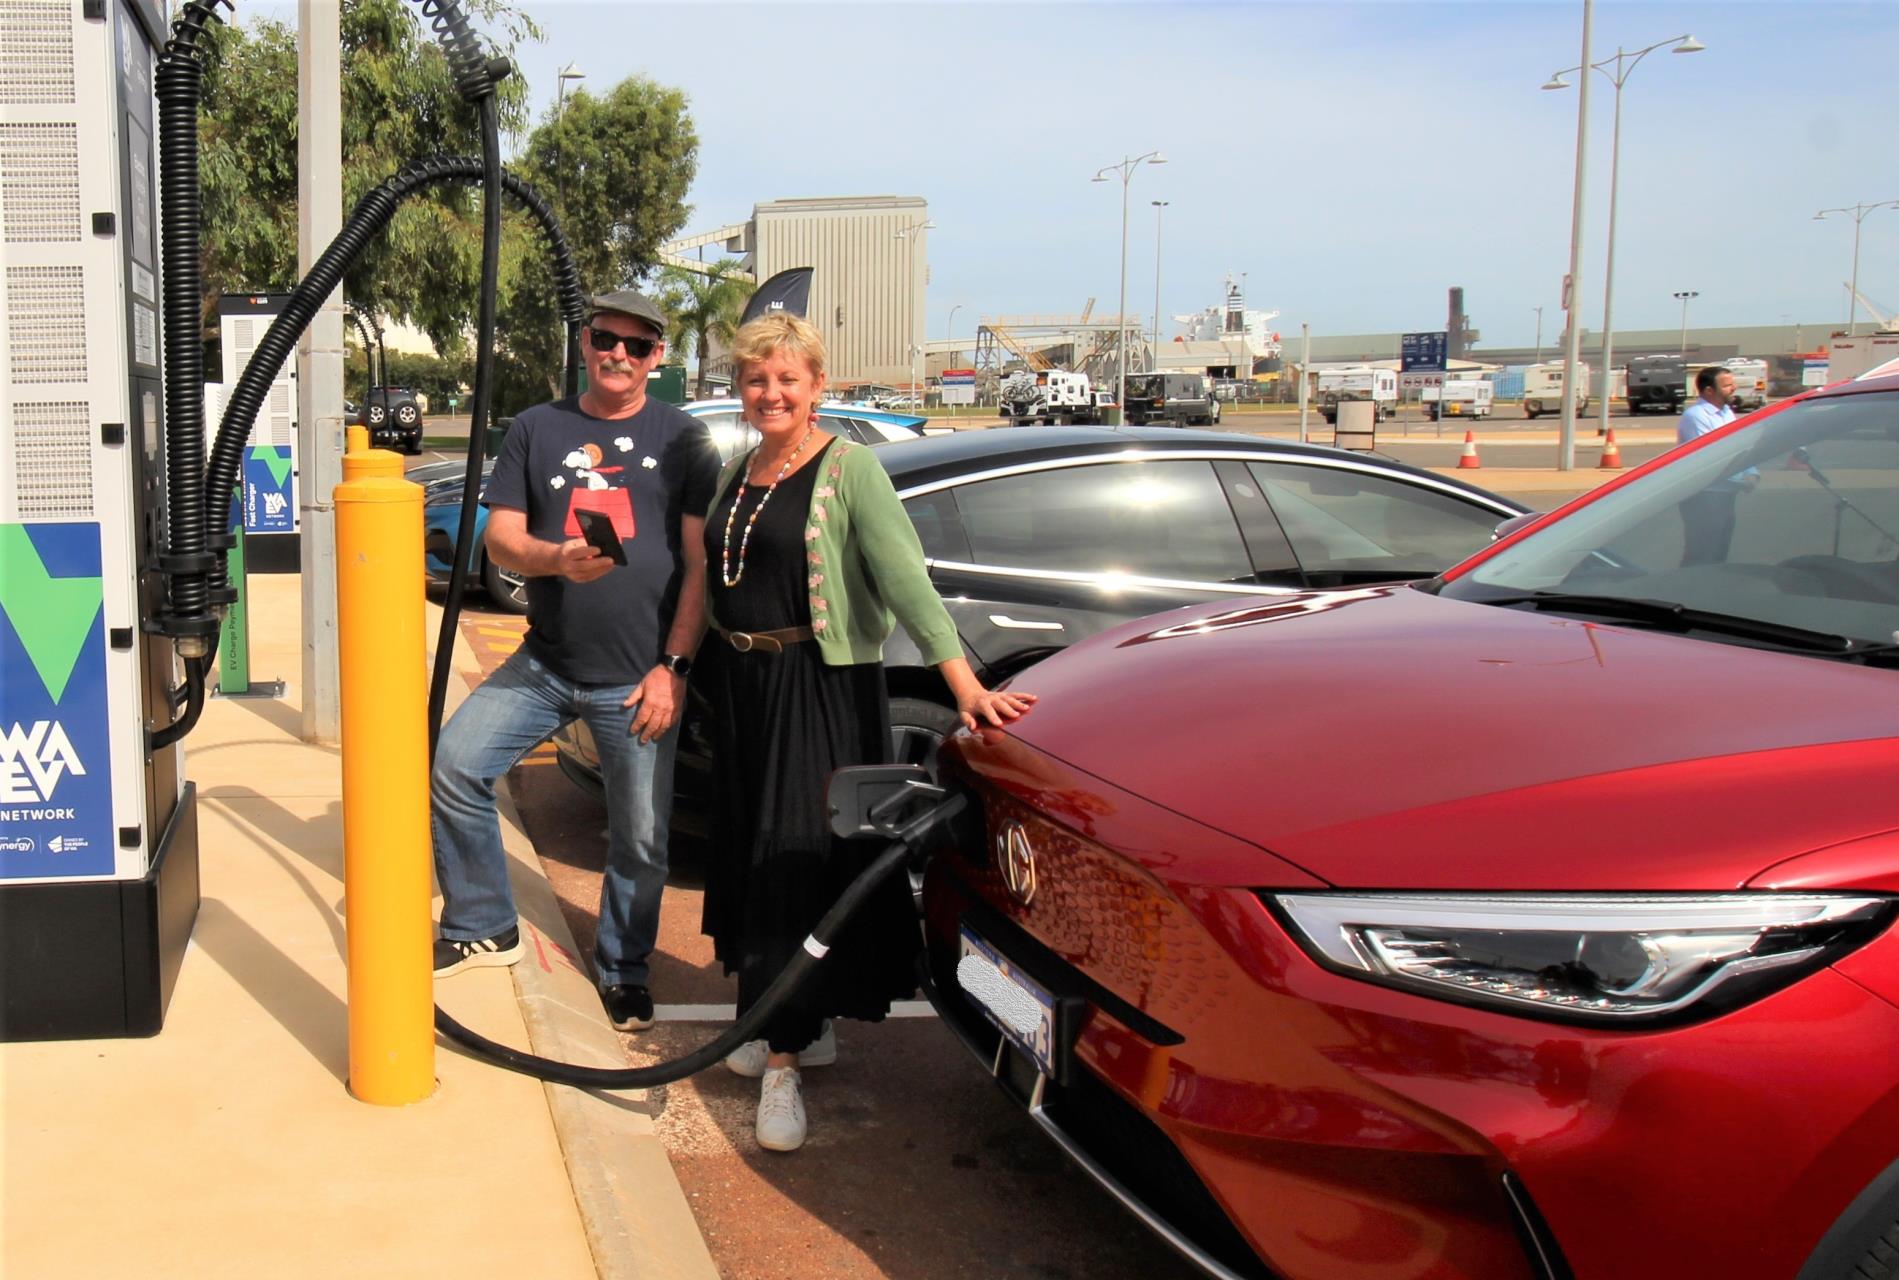 Electric vehicle charging stations open in CBD